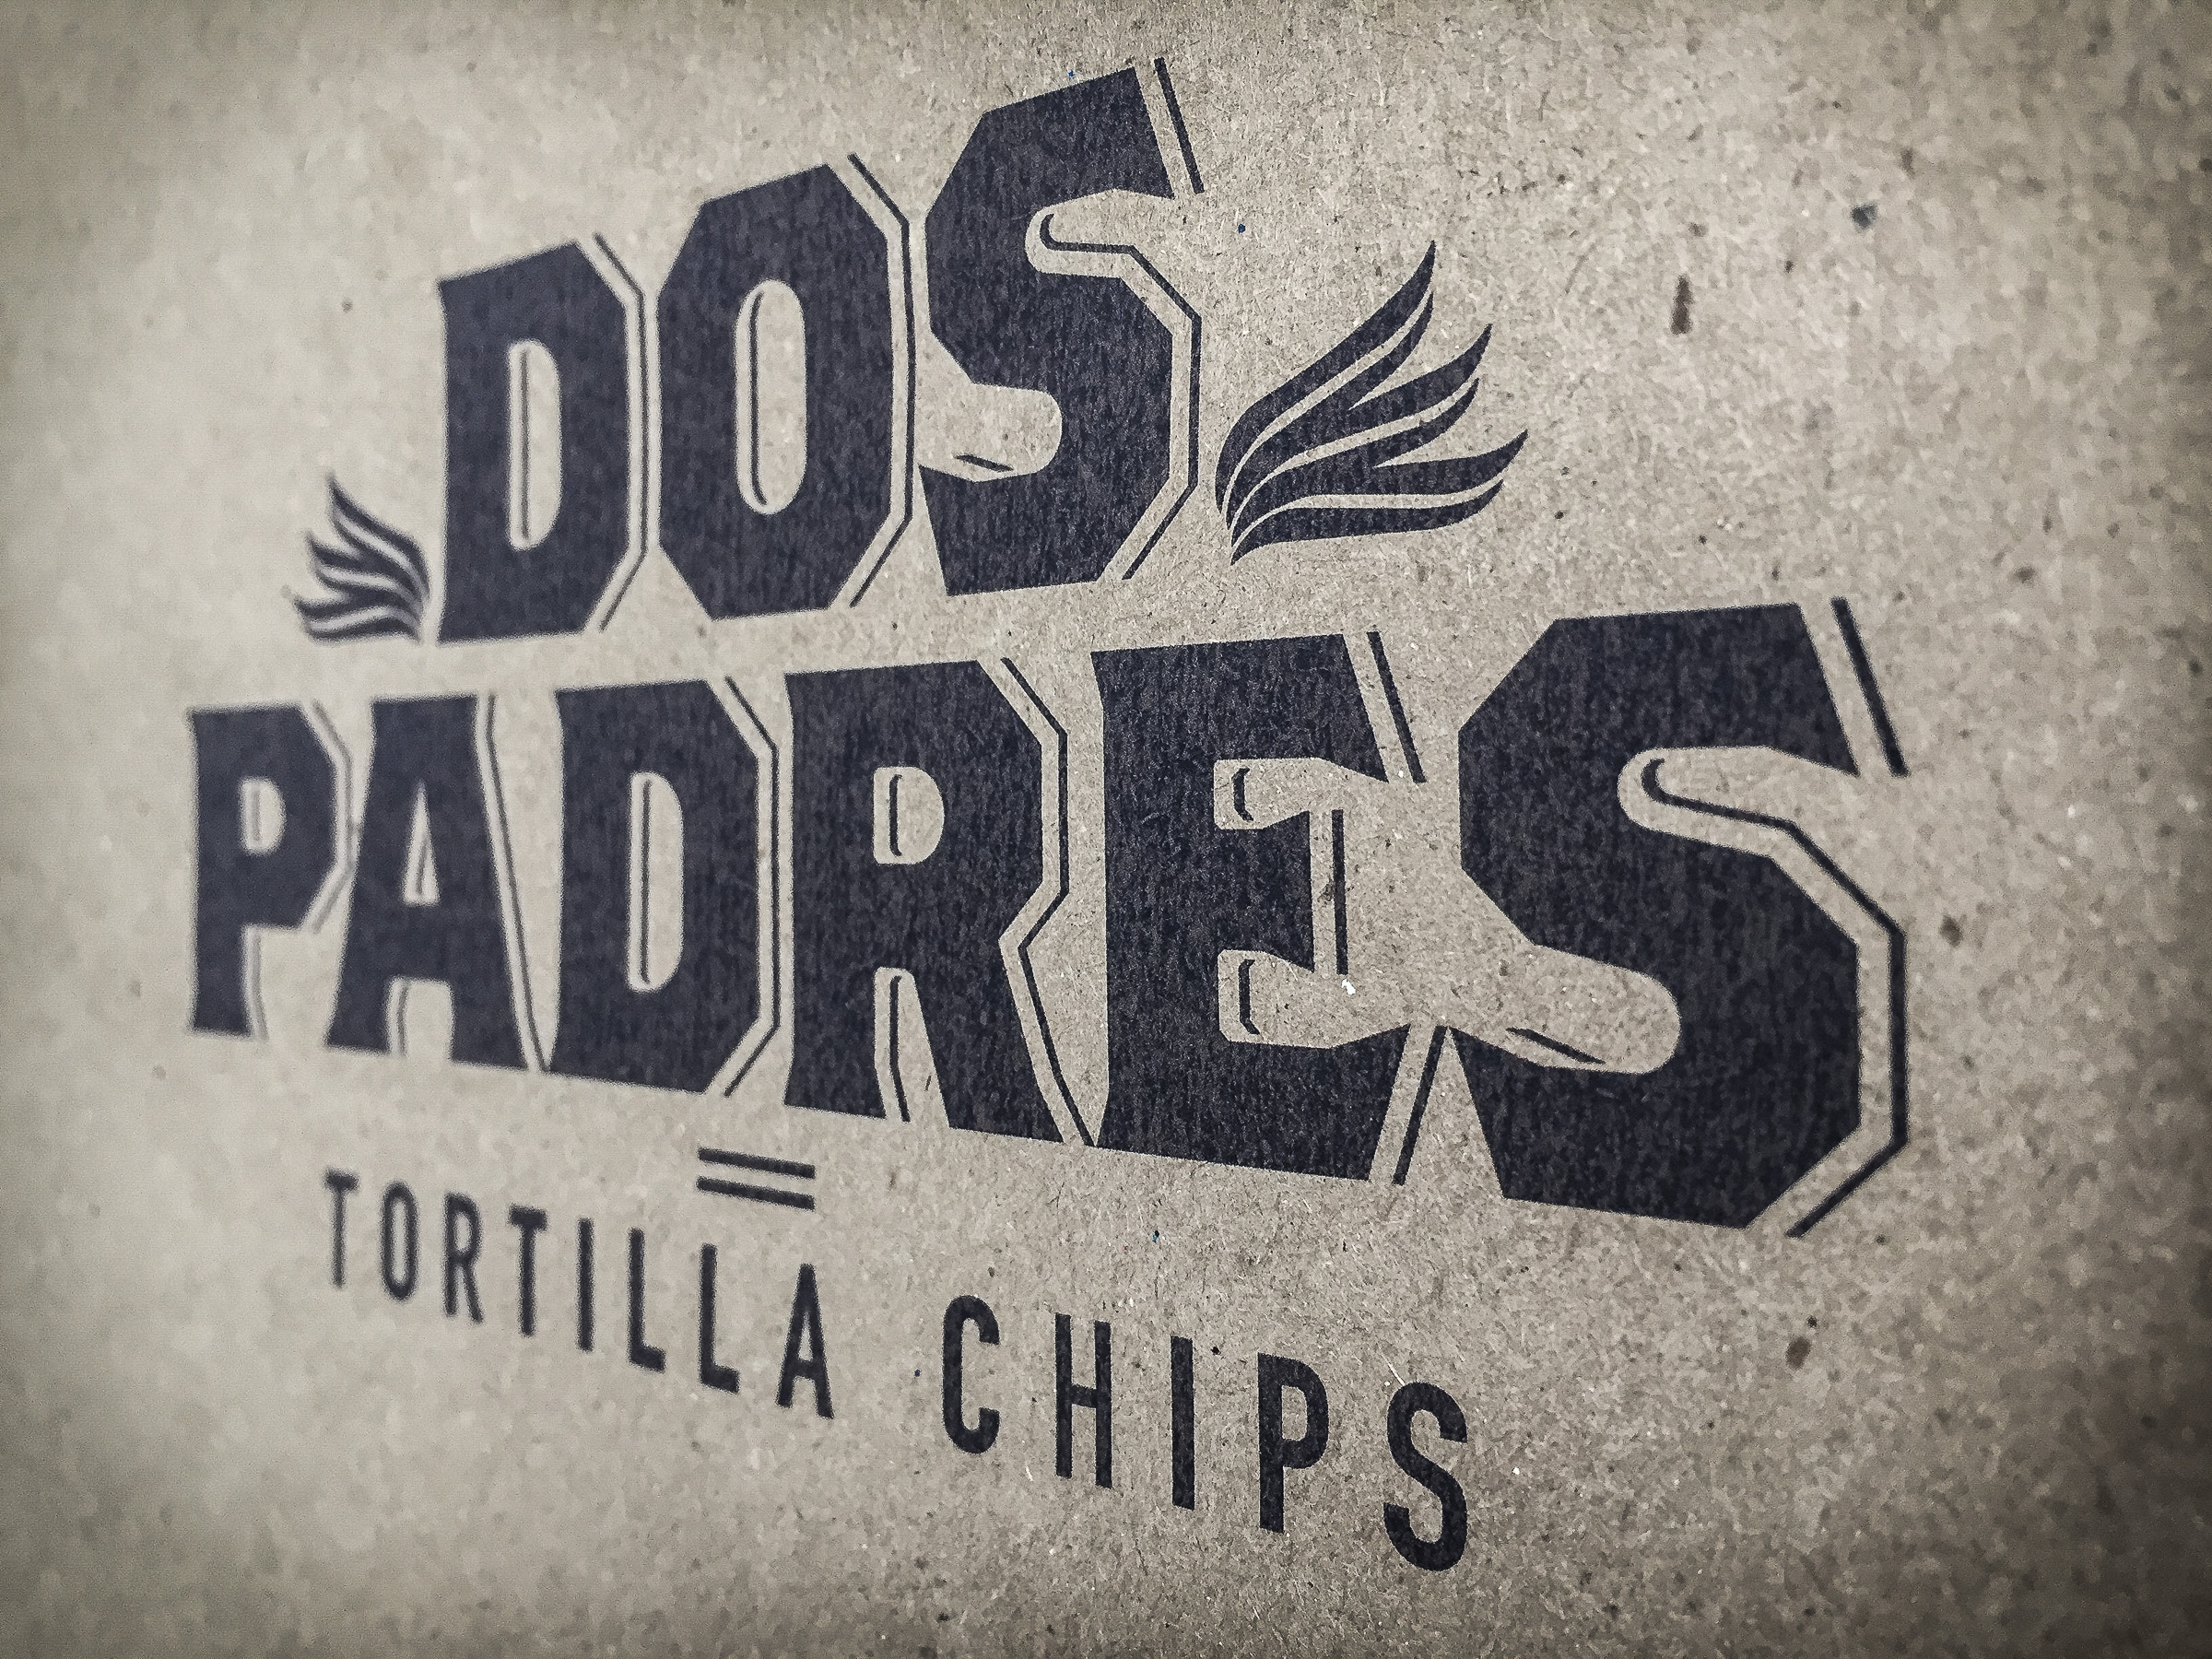 A New Identity and Package Design for Dos Padres Tortilla Chips